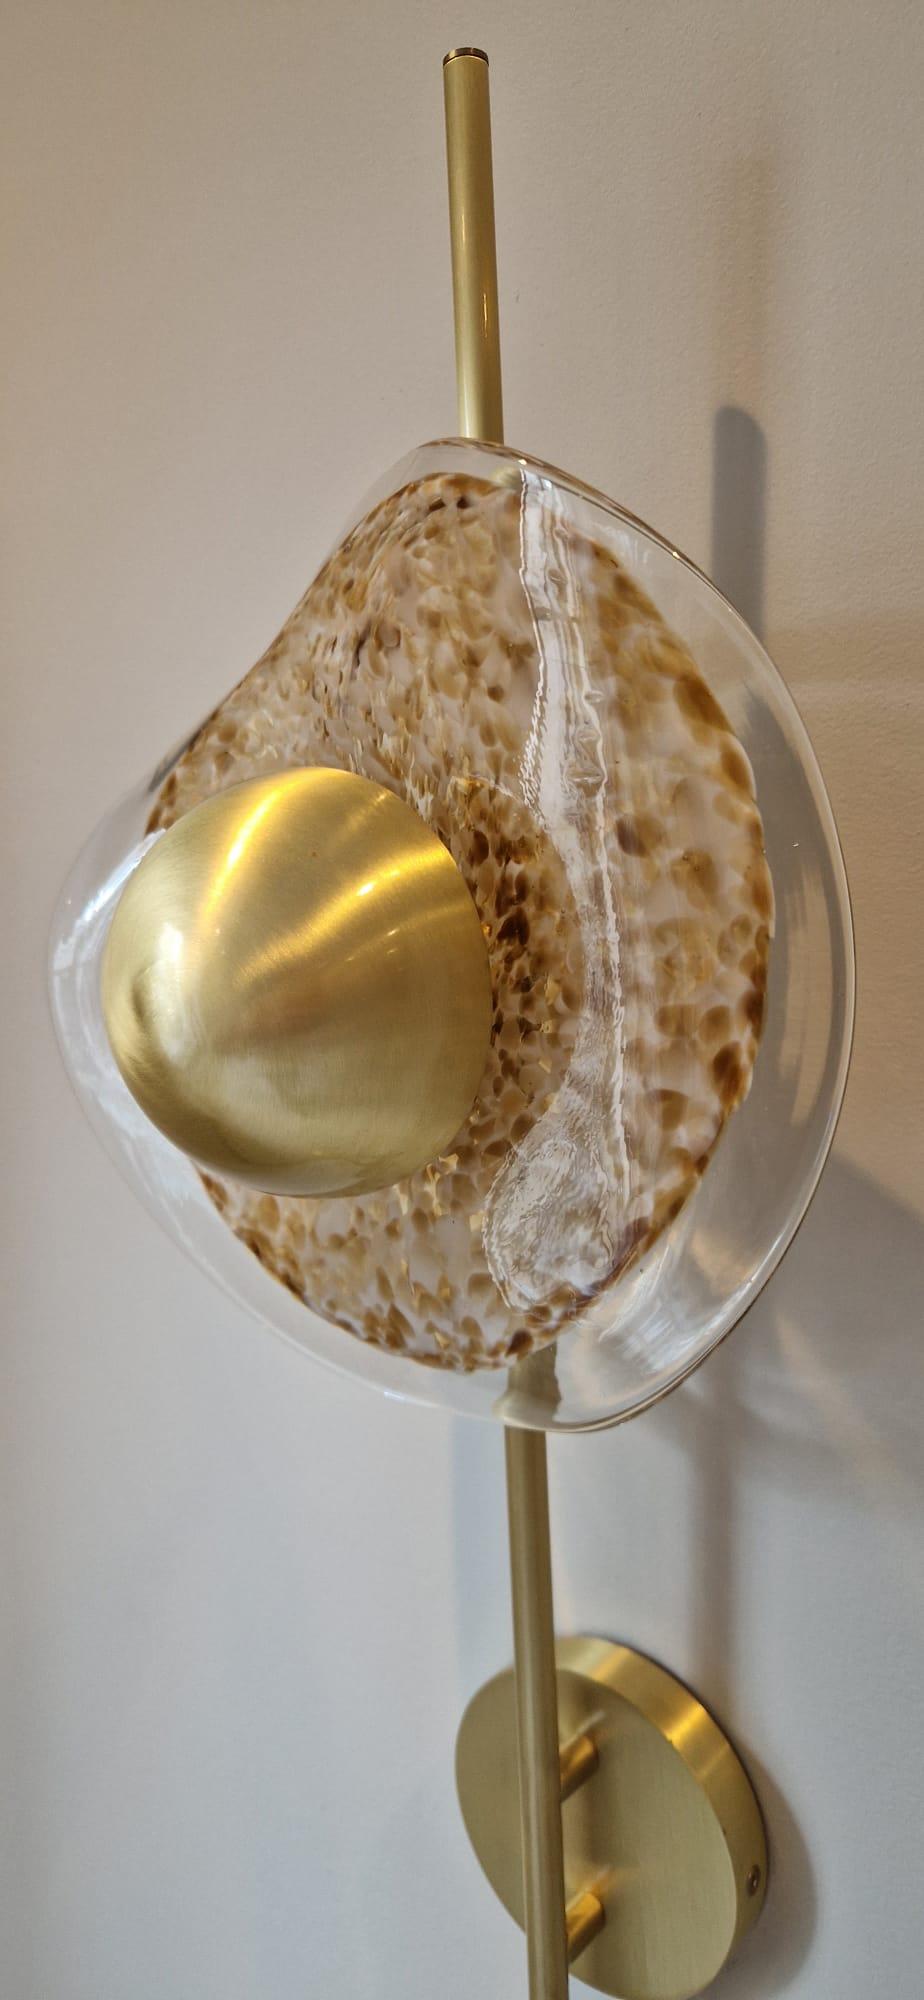 Imagin Ortus Wall Light in Brushed Brass and Decorative Glass In New Condition For Sale In Leighton Buzzard, GB